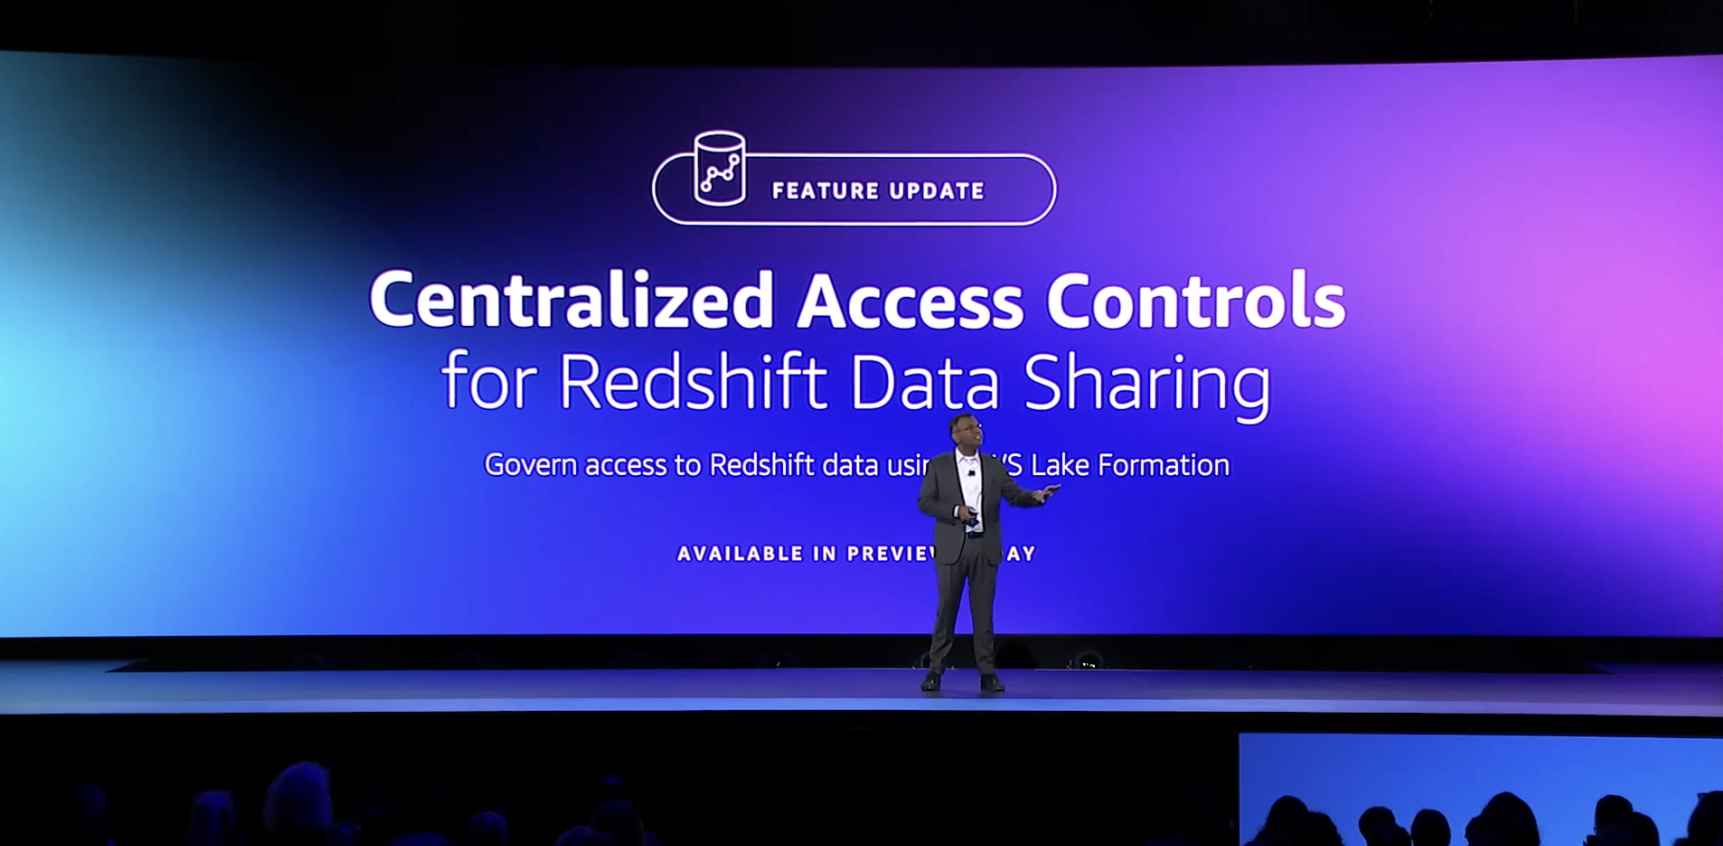 Centralized Access Control for Redshift Data Sharing